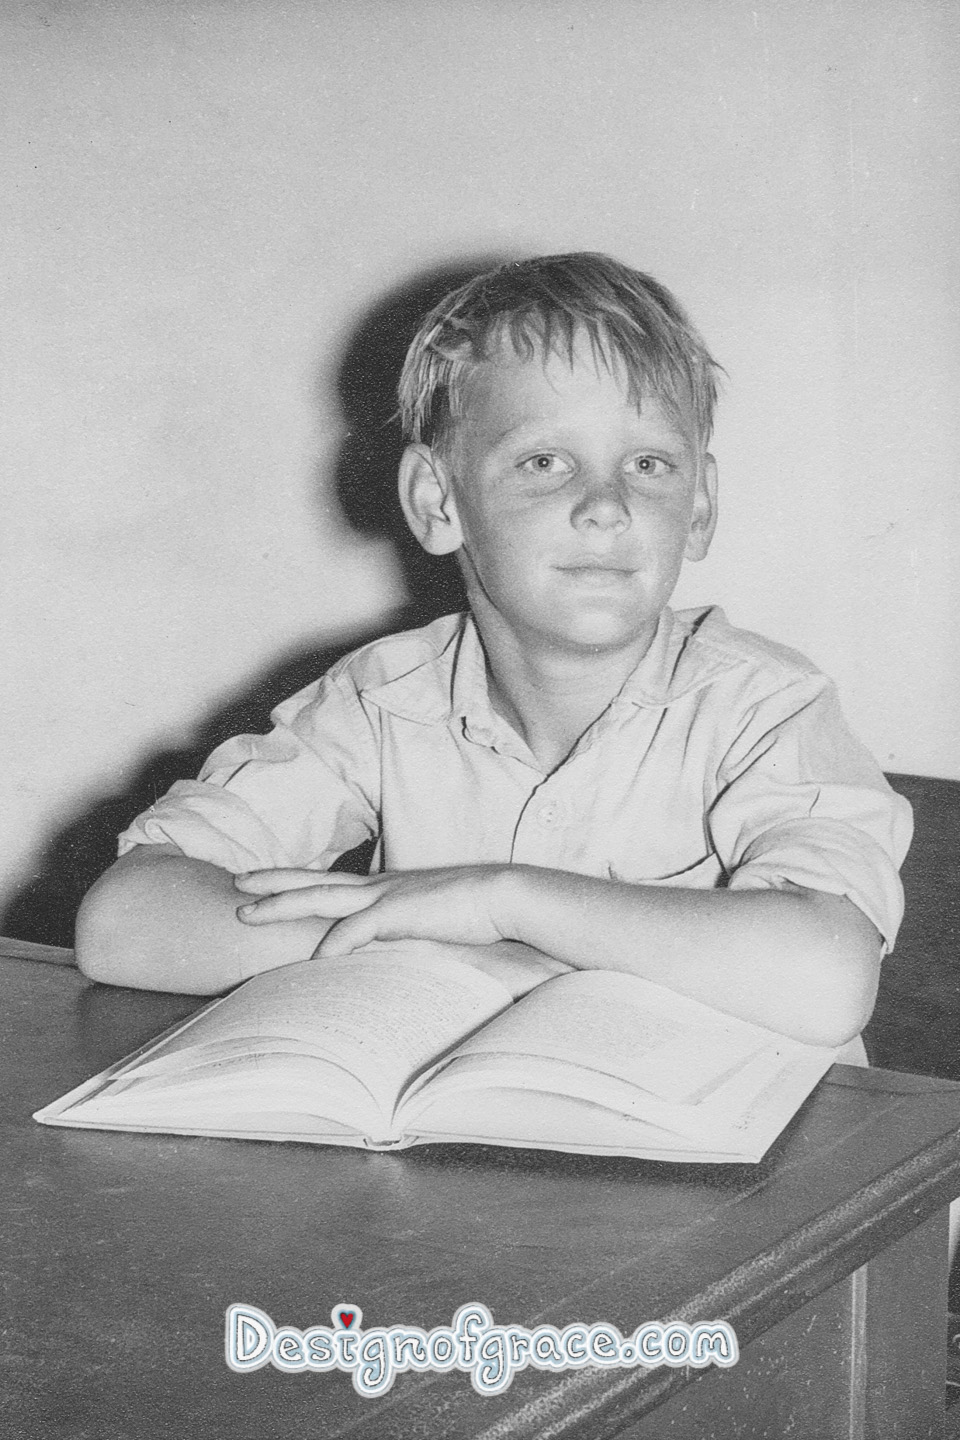 old black and white photo of a boy